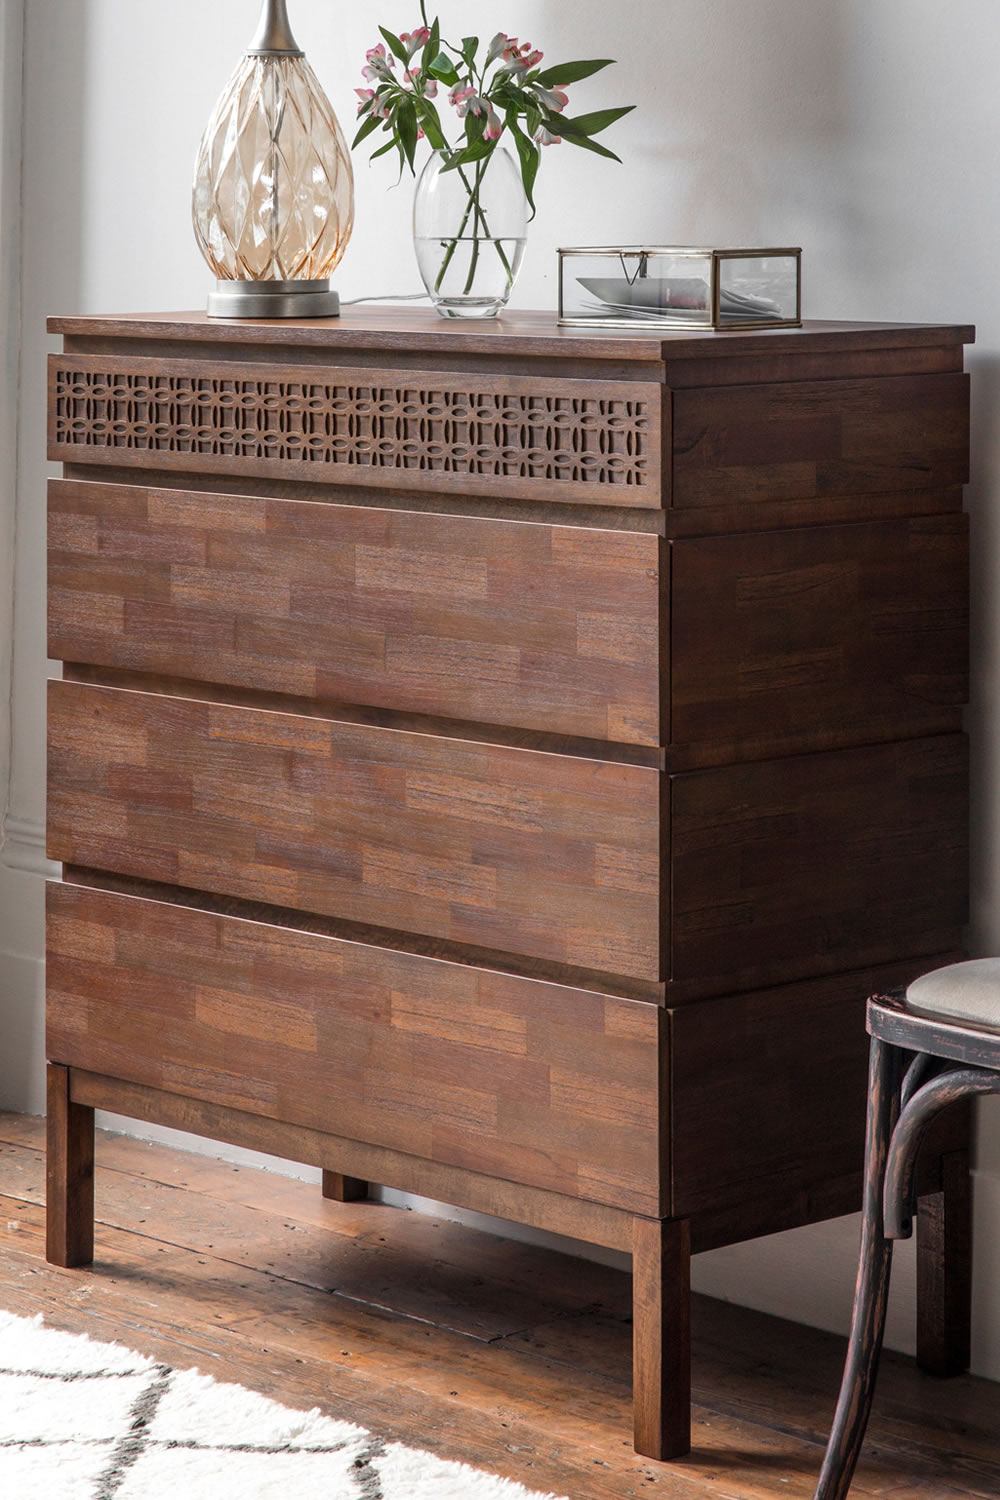 View Boho Brown Wooden FourDrawer Chest Bedroom Storage For Clothes Crafted From Mango Solids Timber Veneers MDF Fretwork Drawer Front information